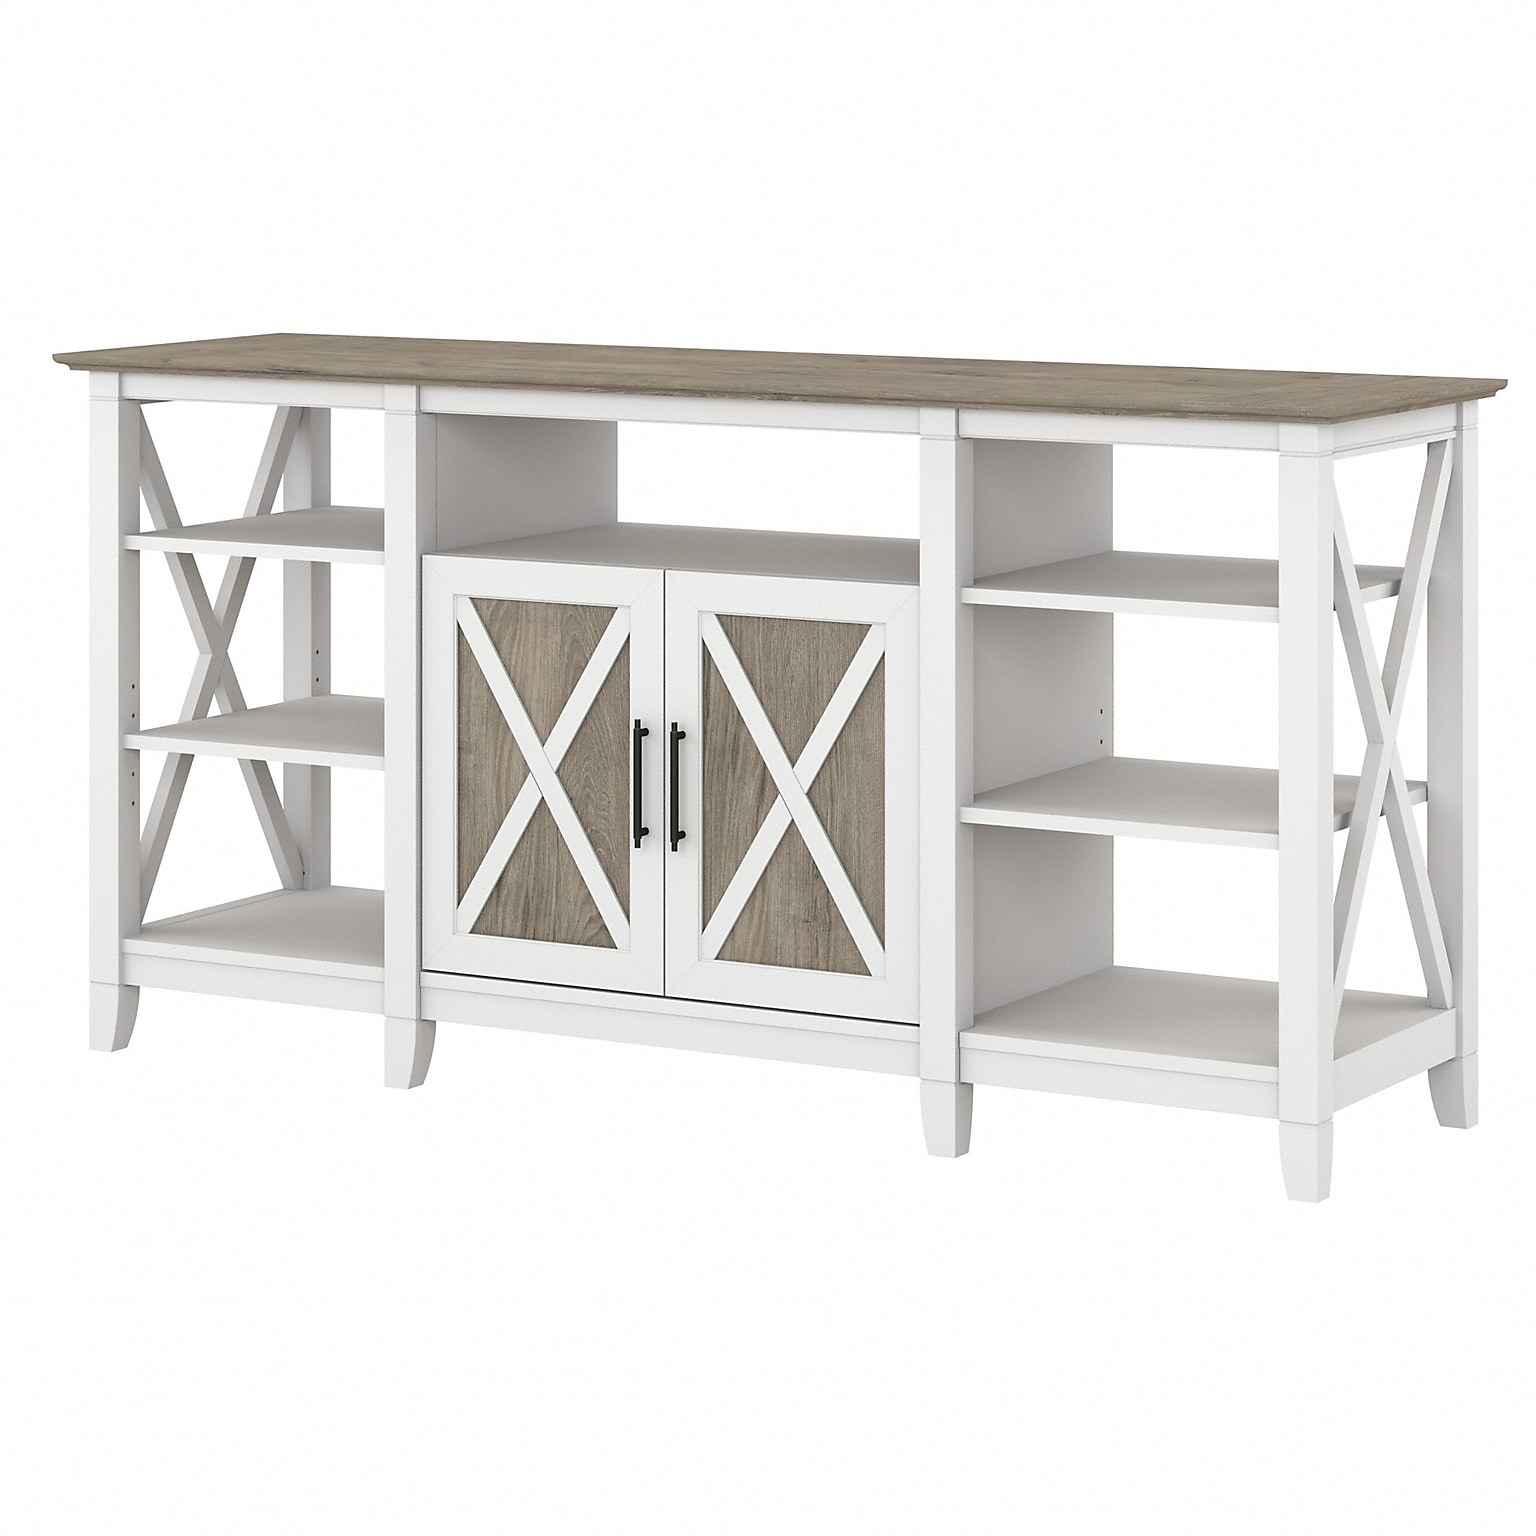 Bush Furniture Key West Console TV Stand, Screens up to 65, Shiplap Gray/Pure White (KWV160G2W-03)